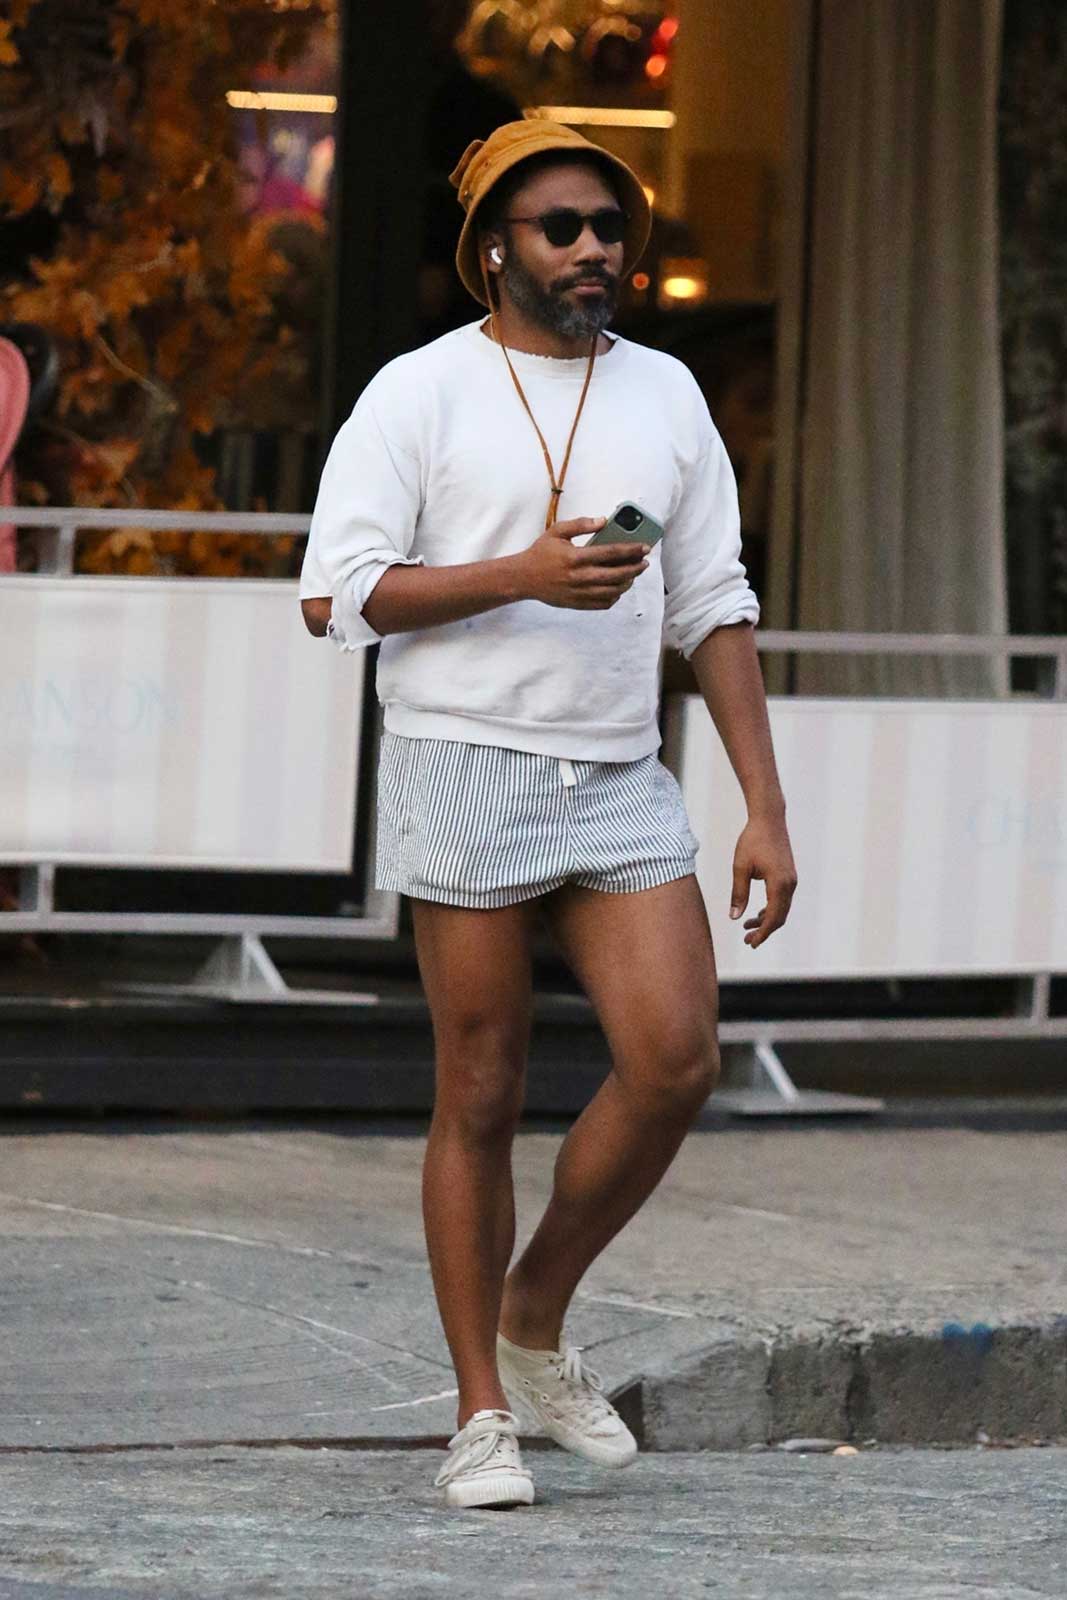 Donald Glover Rocks Tiny Shorts in NYC, Flexing Muscular Legs